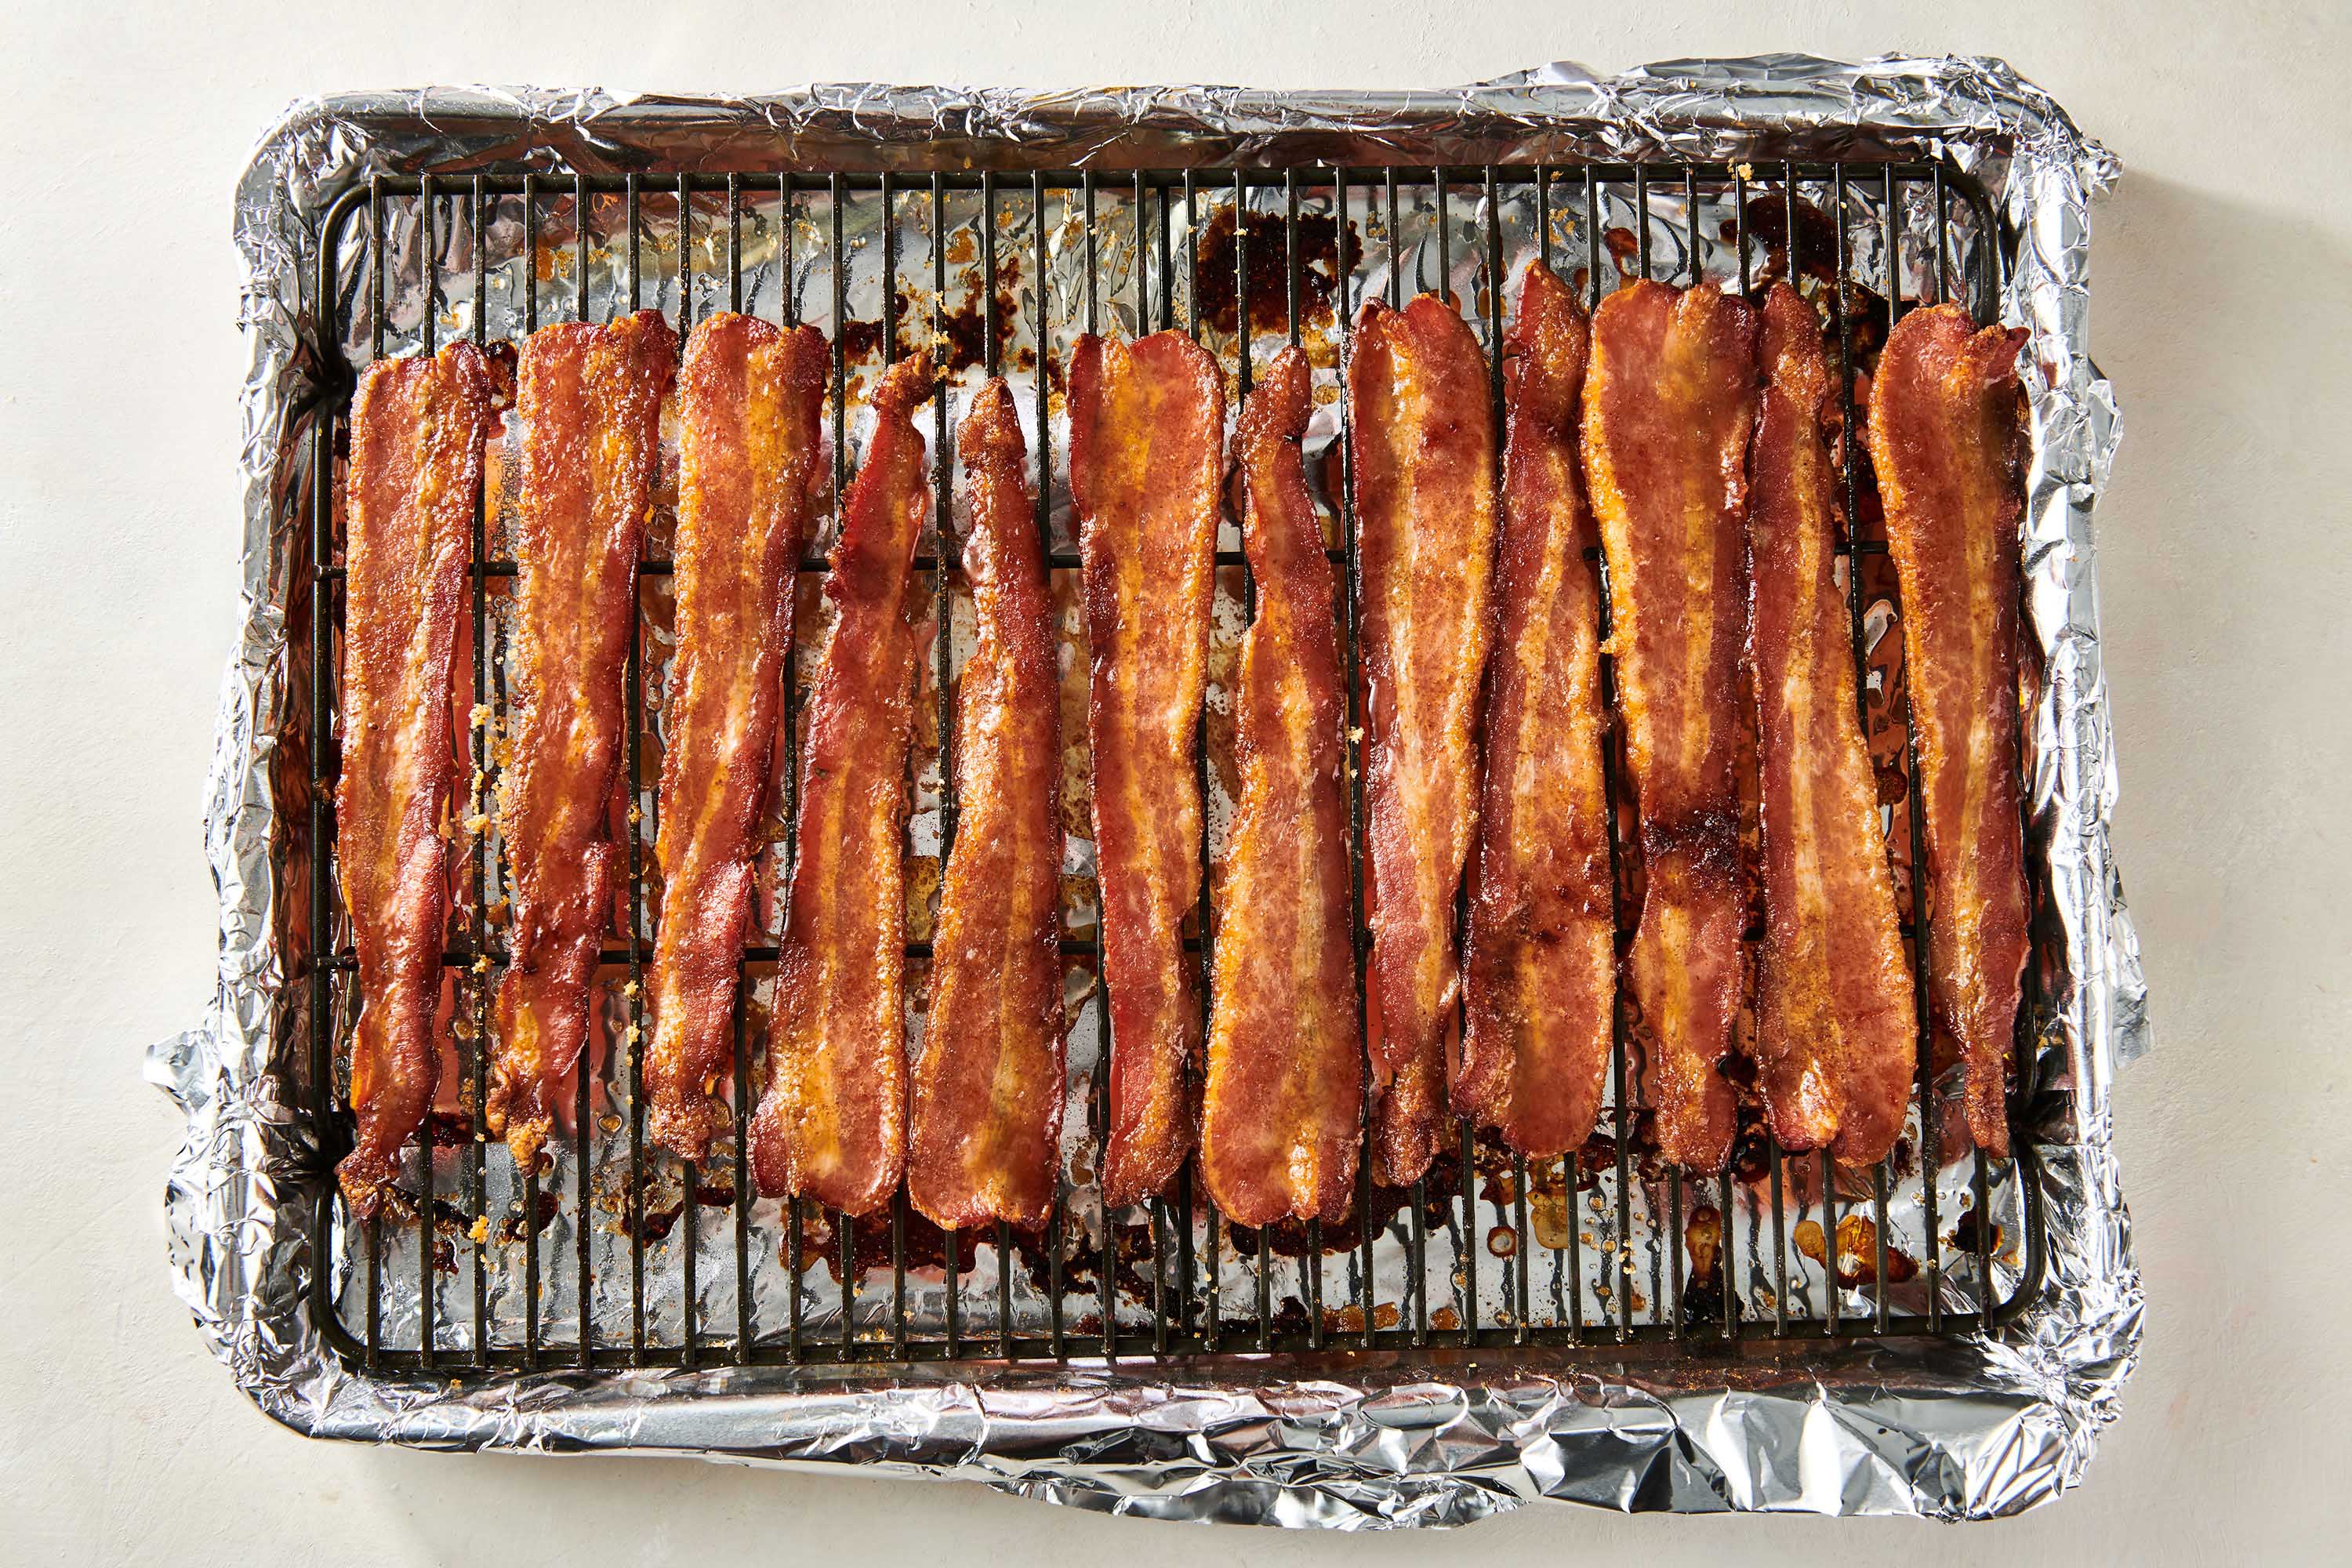 Candied Bacon on wire rack and baking sheet.